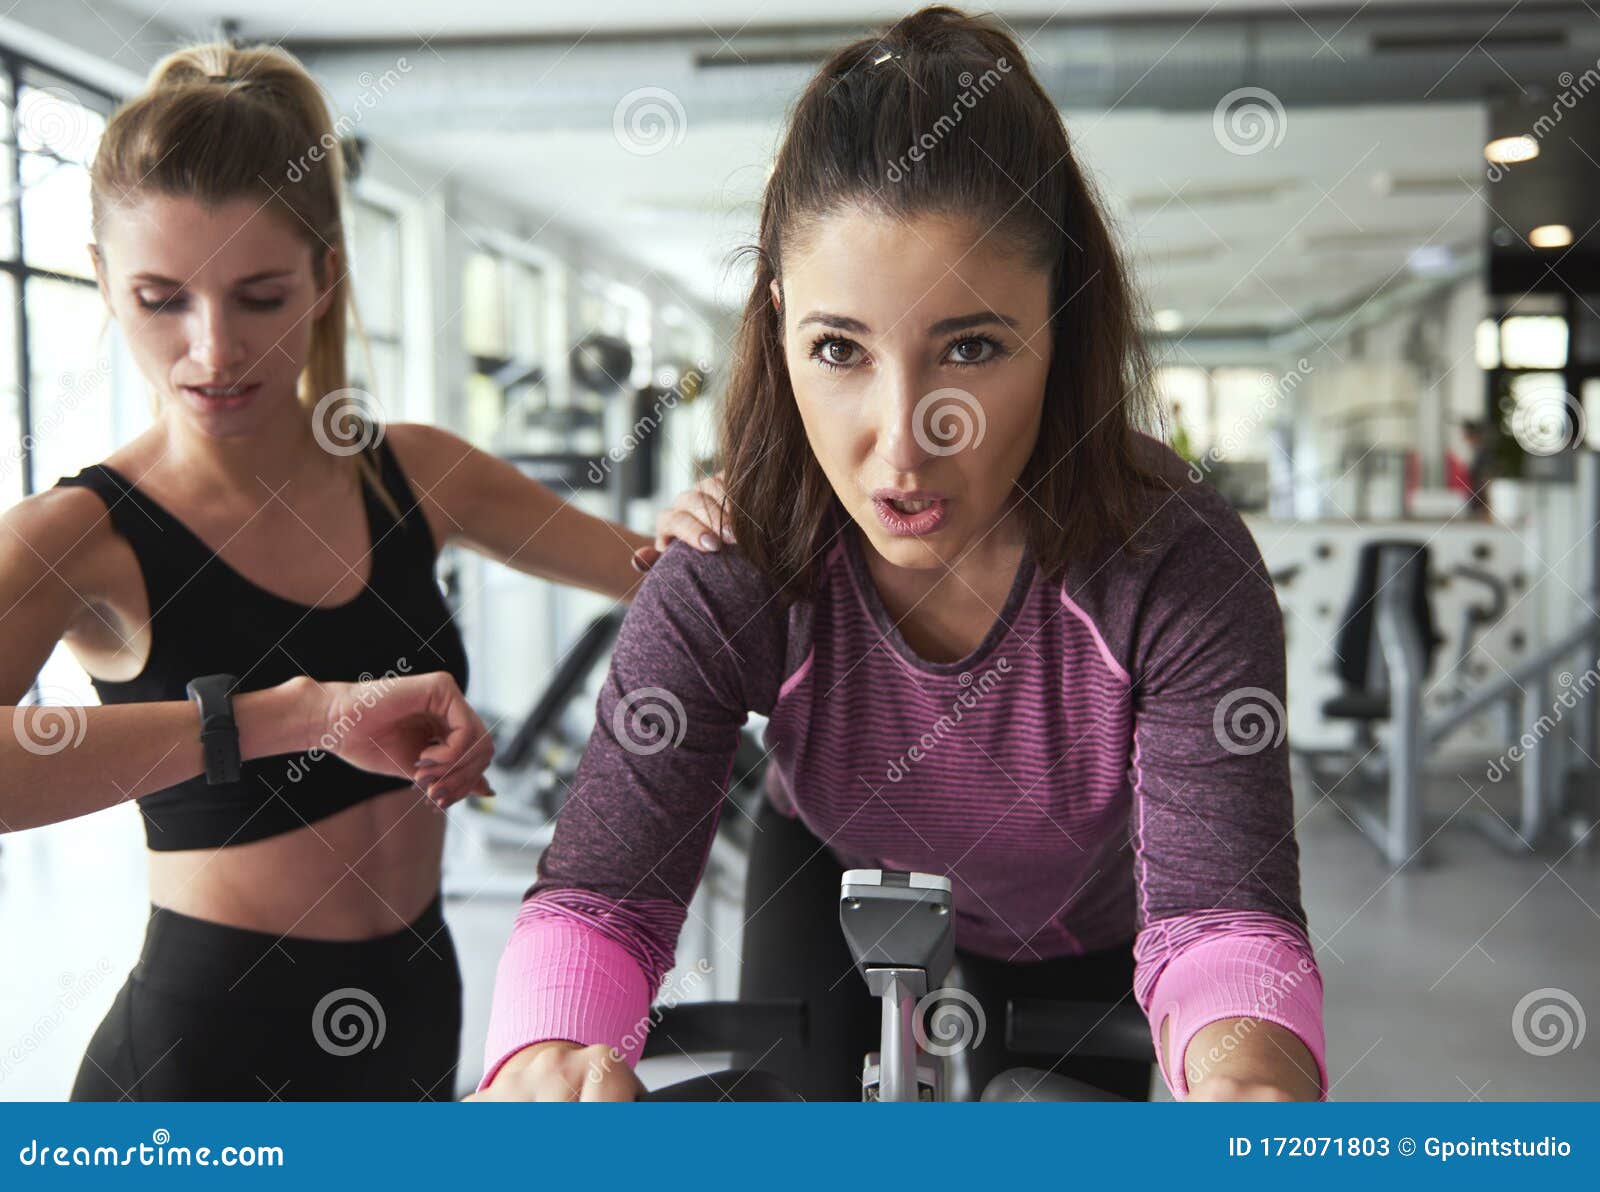 Big Support from the Personal Trainer Stock Image - Image of motivation ...